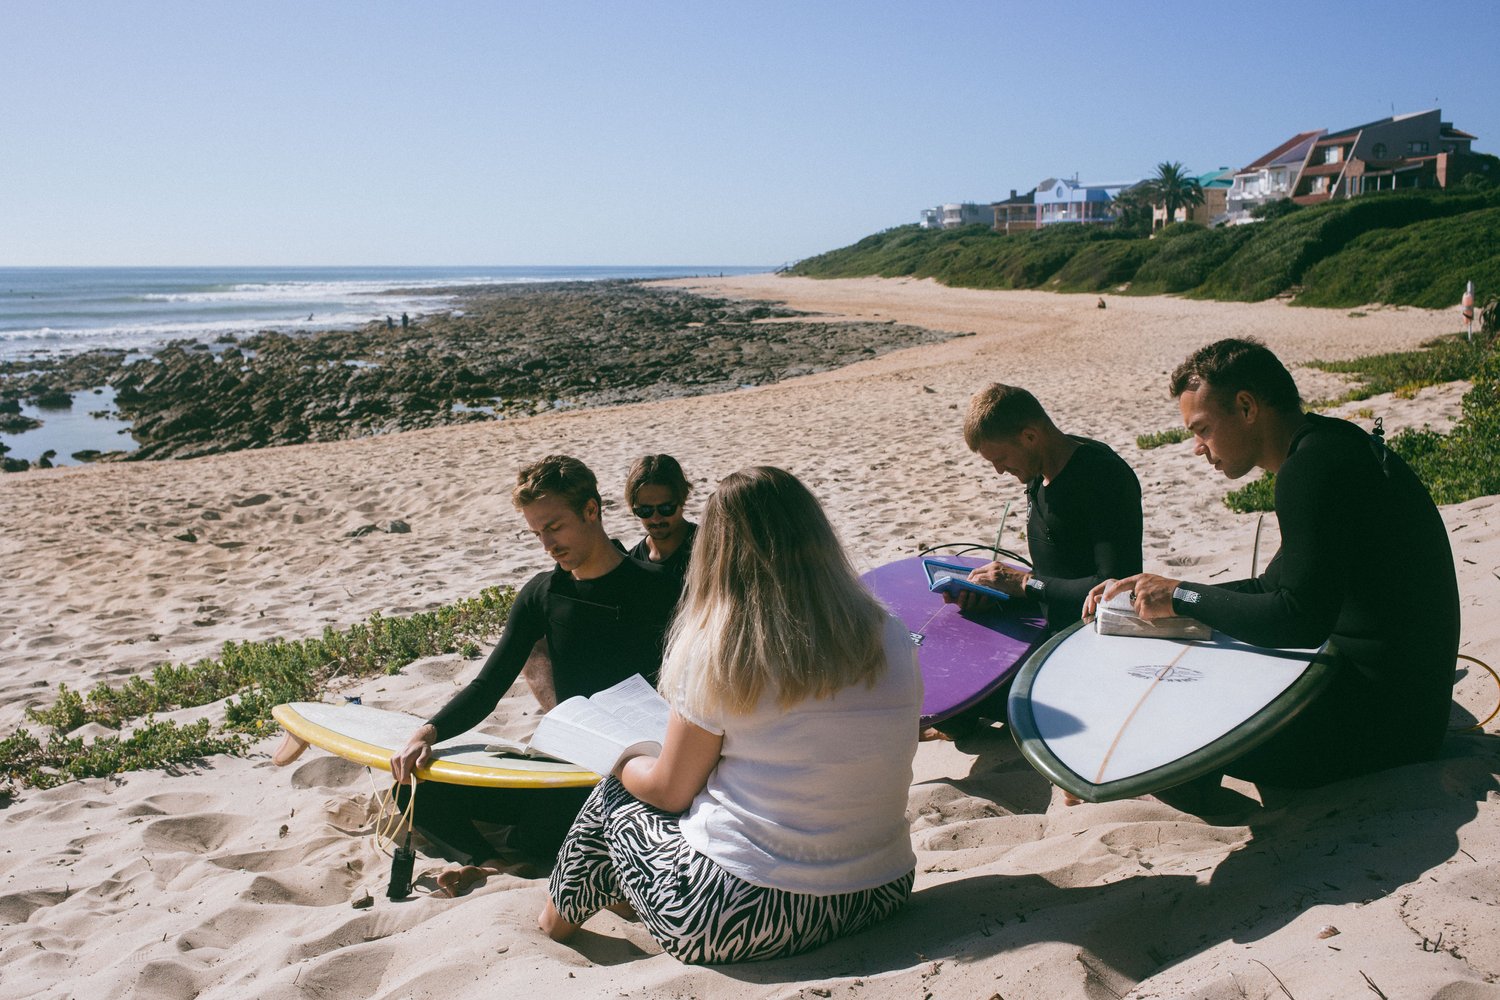 United States — Christian Surfers